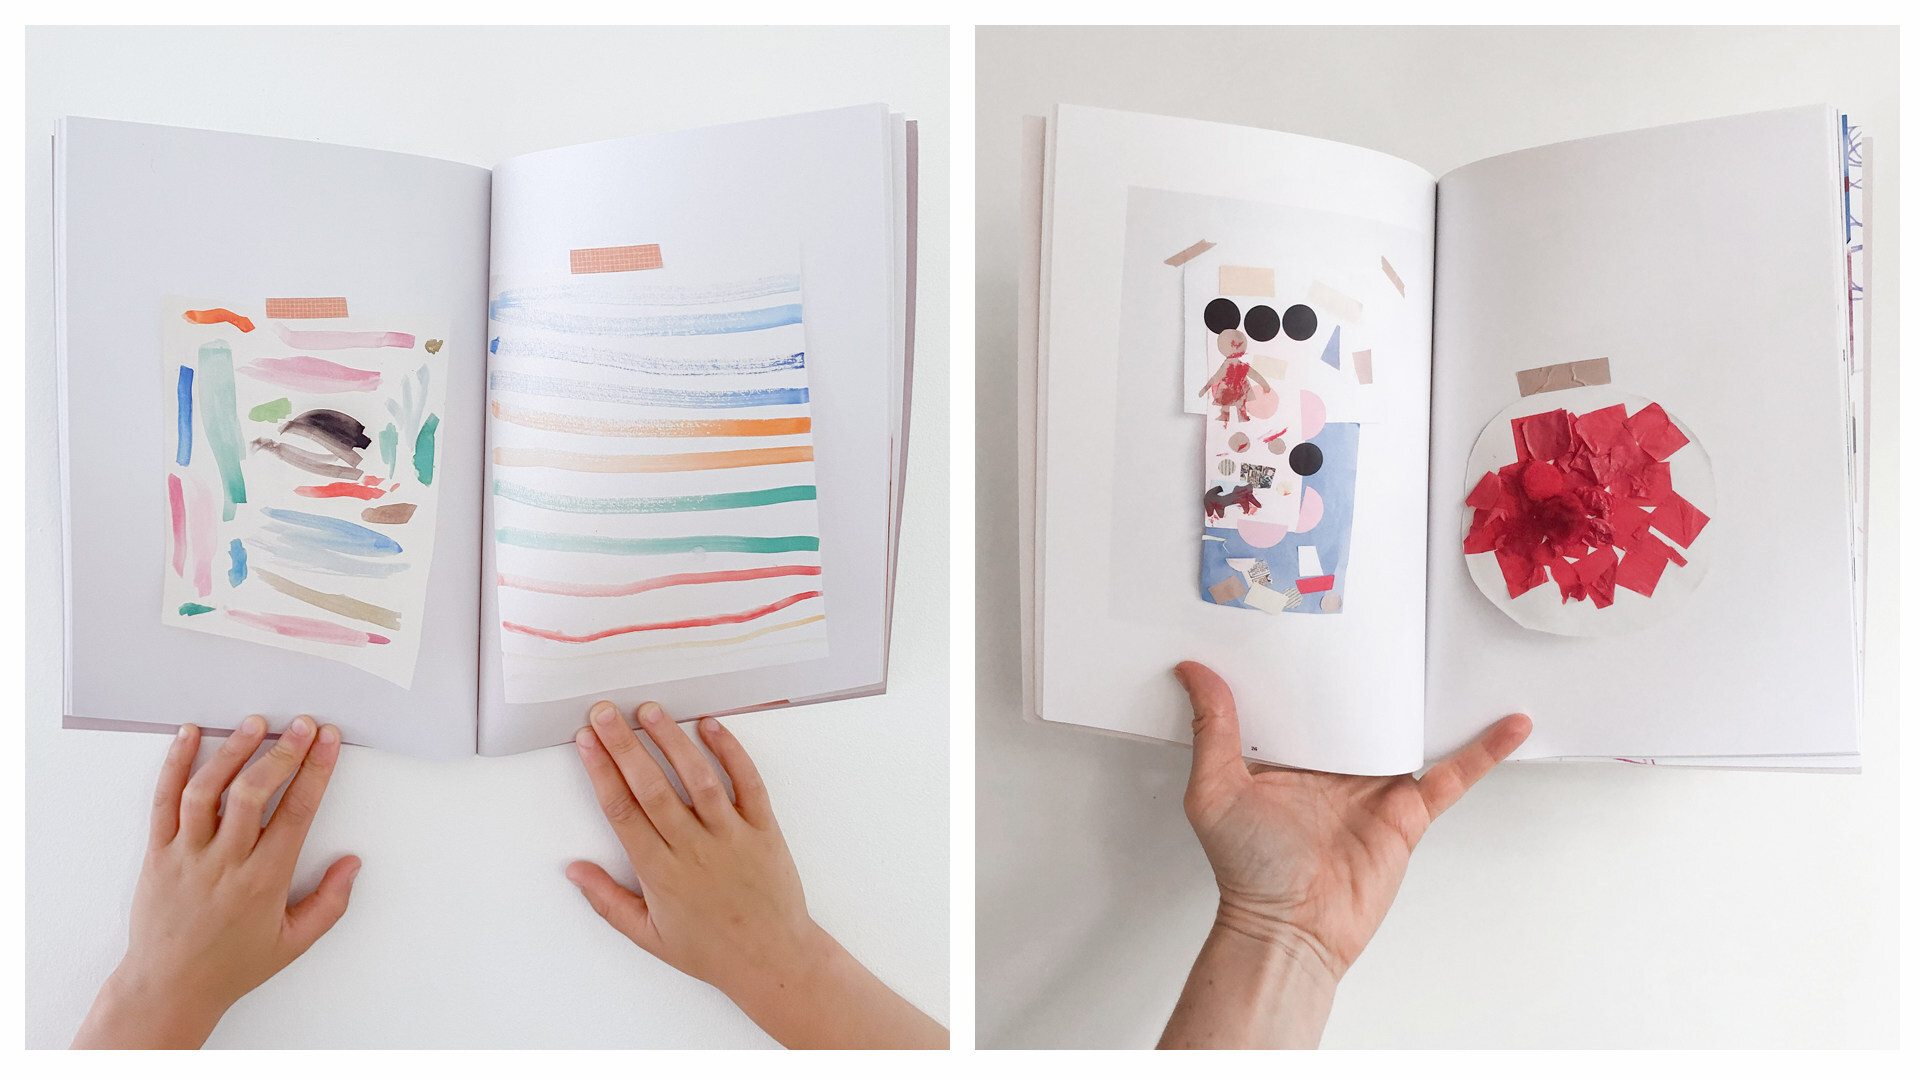 Transform your kids’ art into an art book with the Recently app